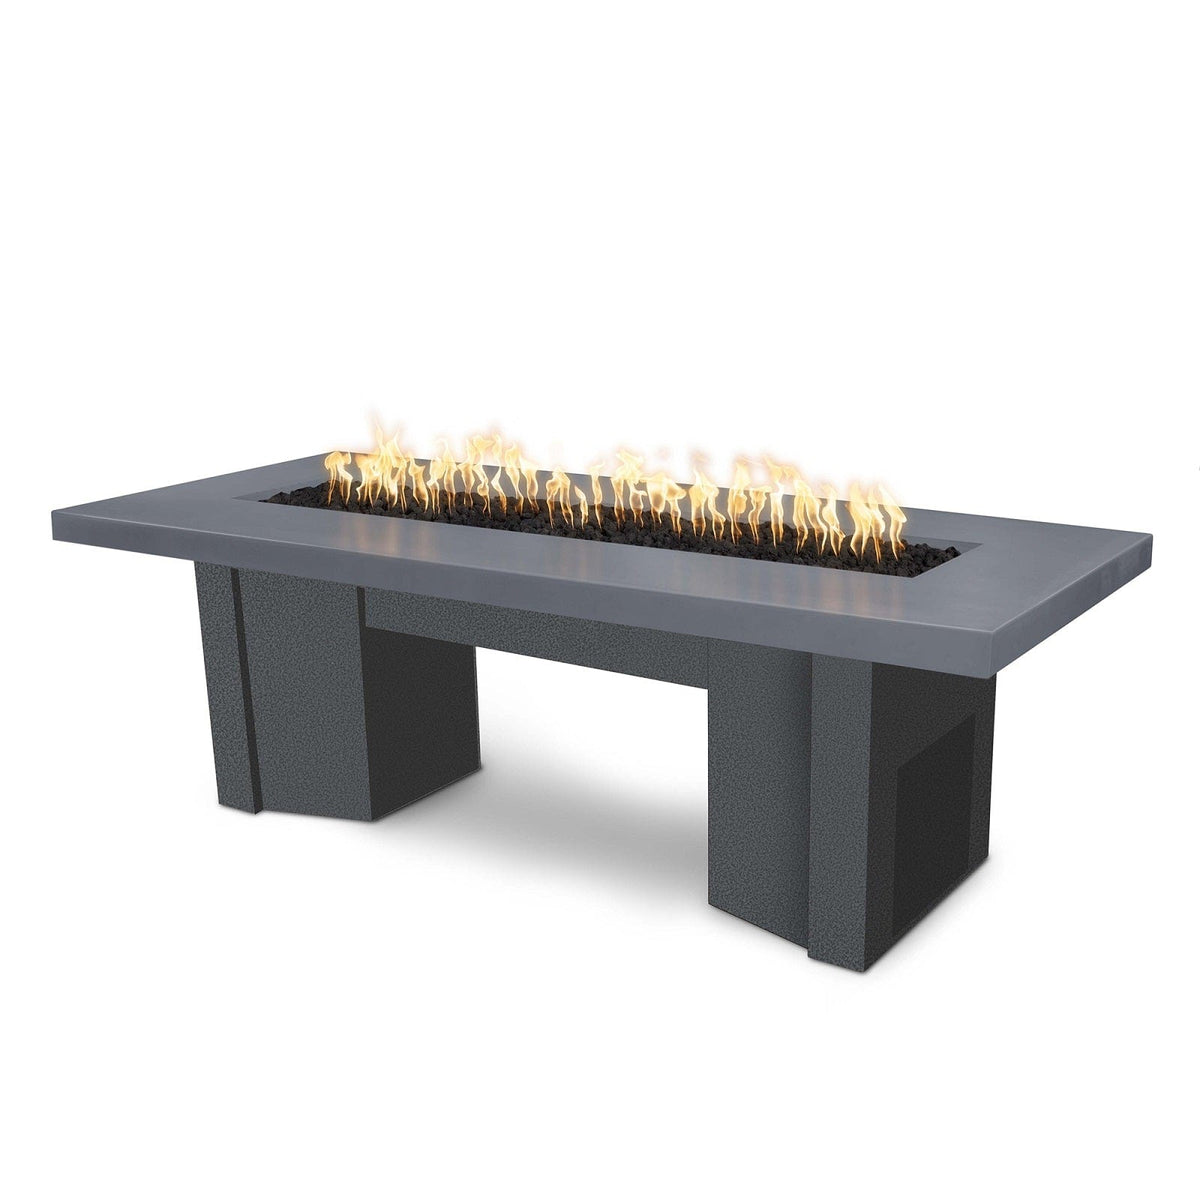 The Outdoor Plus Fire Features Gray (-GRY) / Silver Vein Powder Coated Steel (-SLV) The Outdoor Plus 78&quot; Alameda Fire Table Smooth Concrete in Natural Gas - Flame Sense System with Push Button Spark Igniter / OPT-ALMGFRC78FSEN-NG